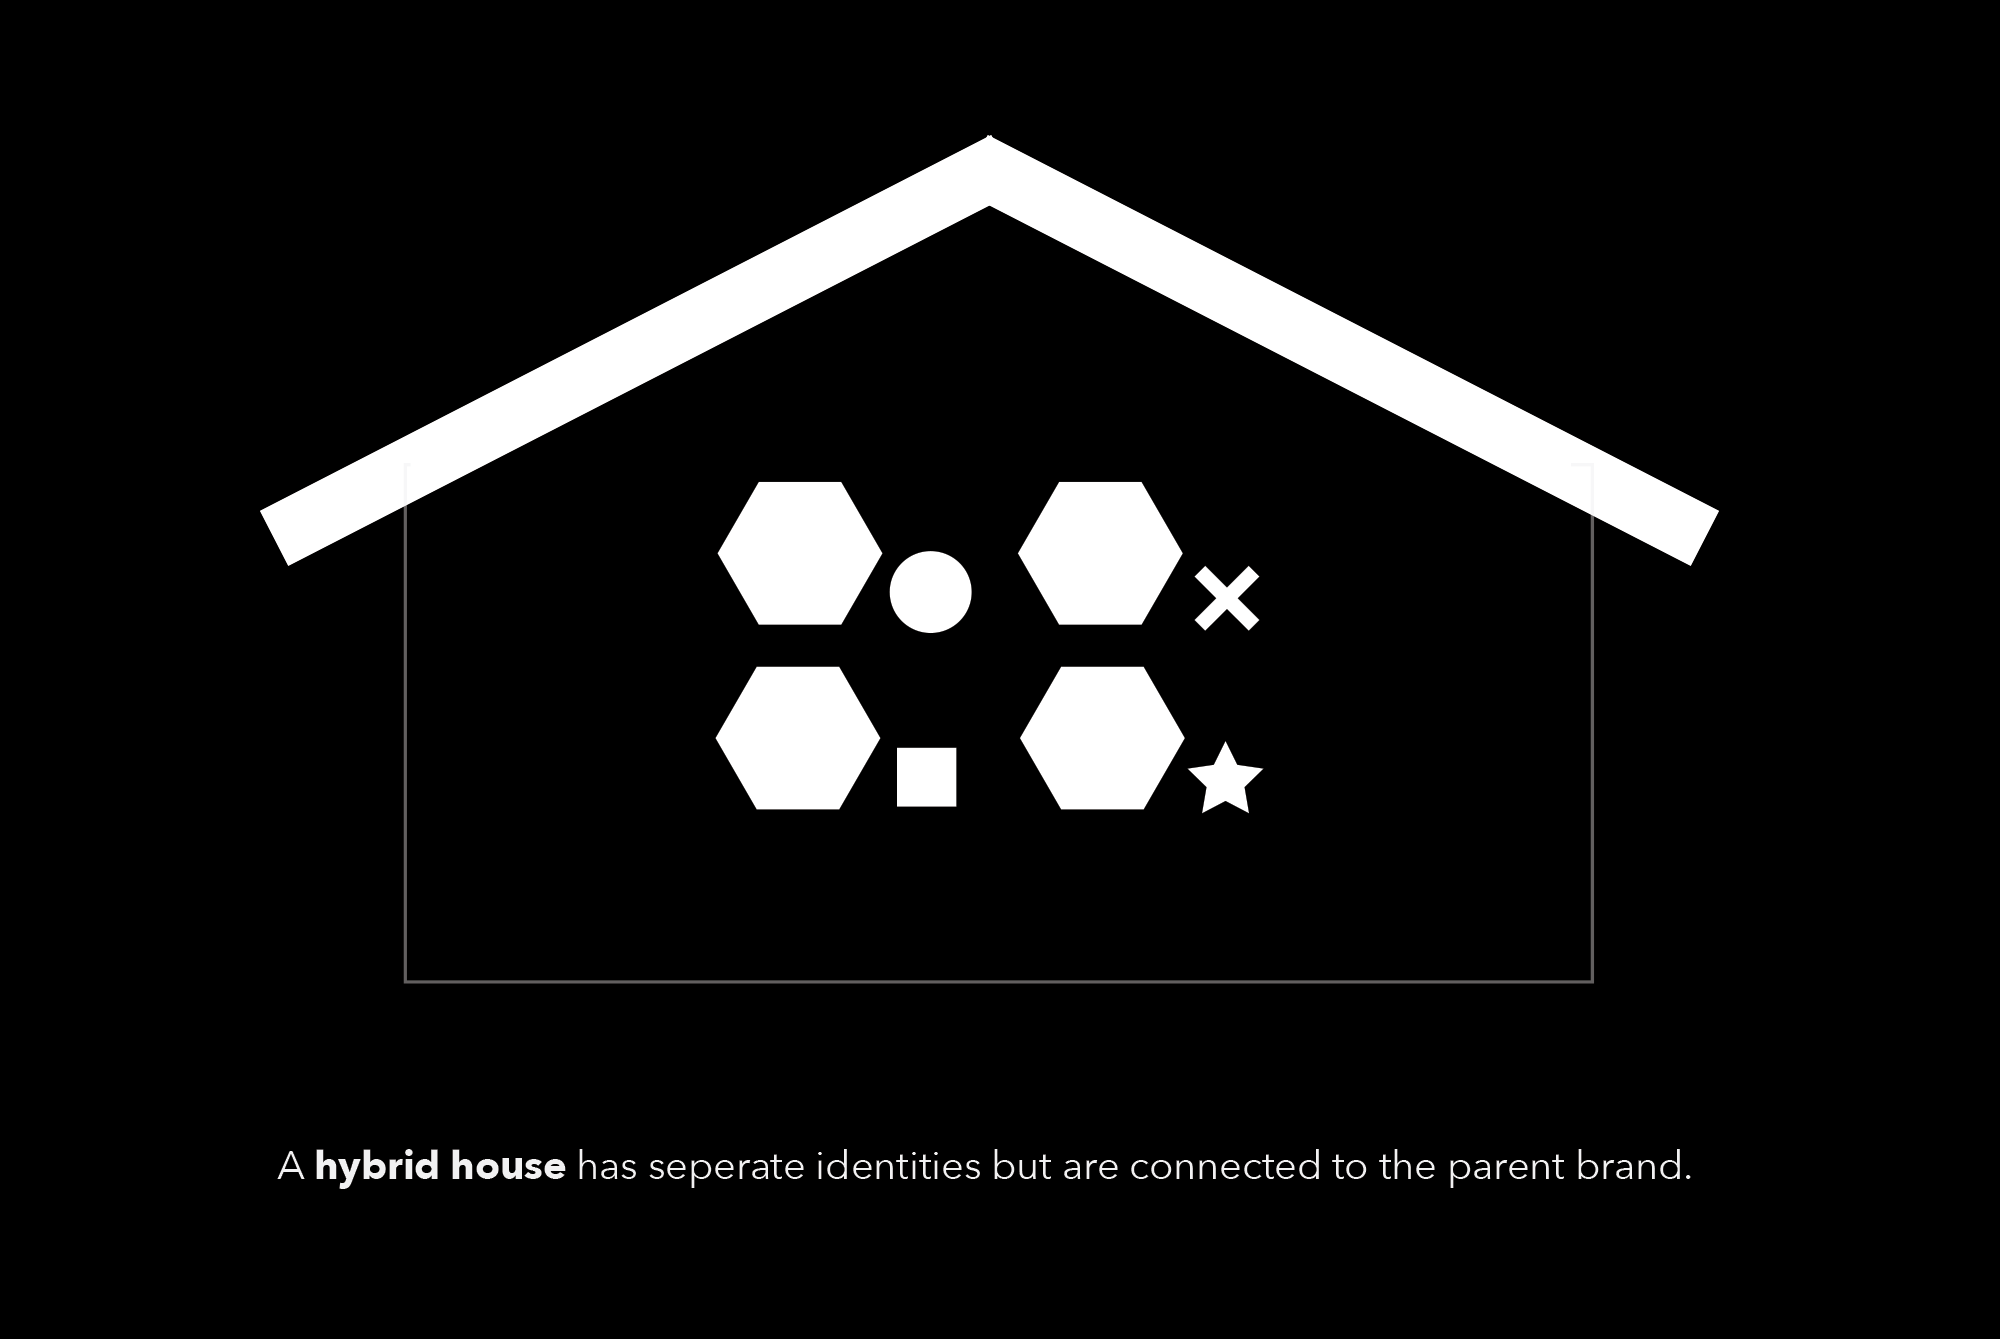 Example of Brand Architecture – The Hybrid House of Brands